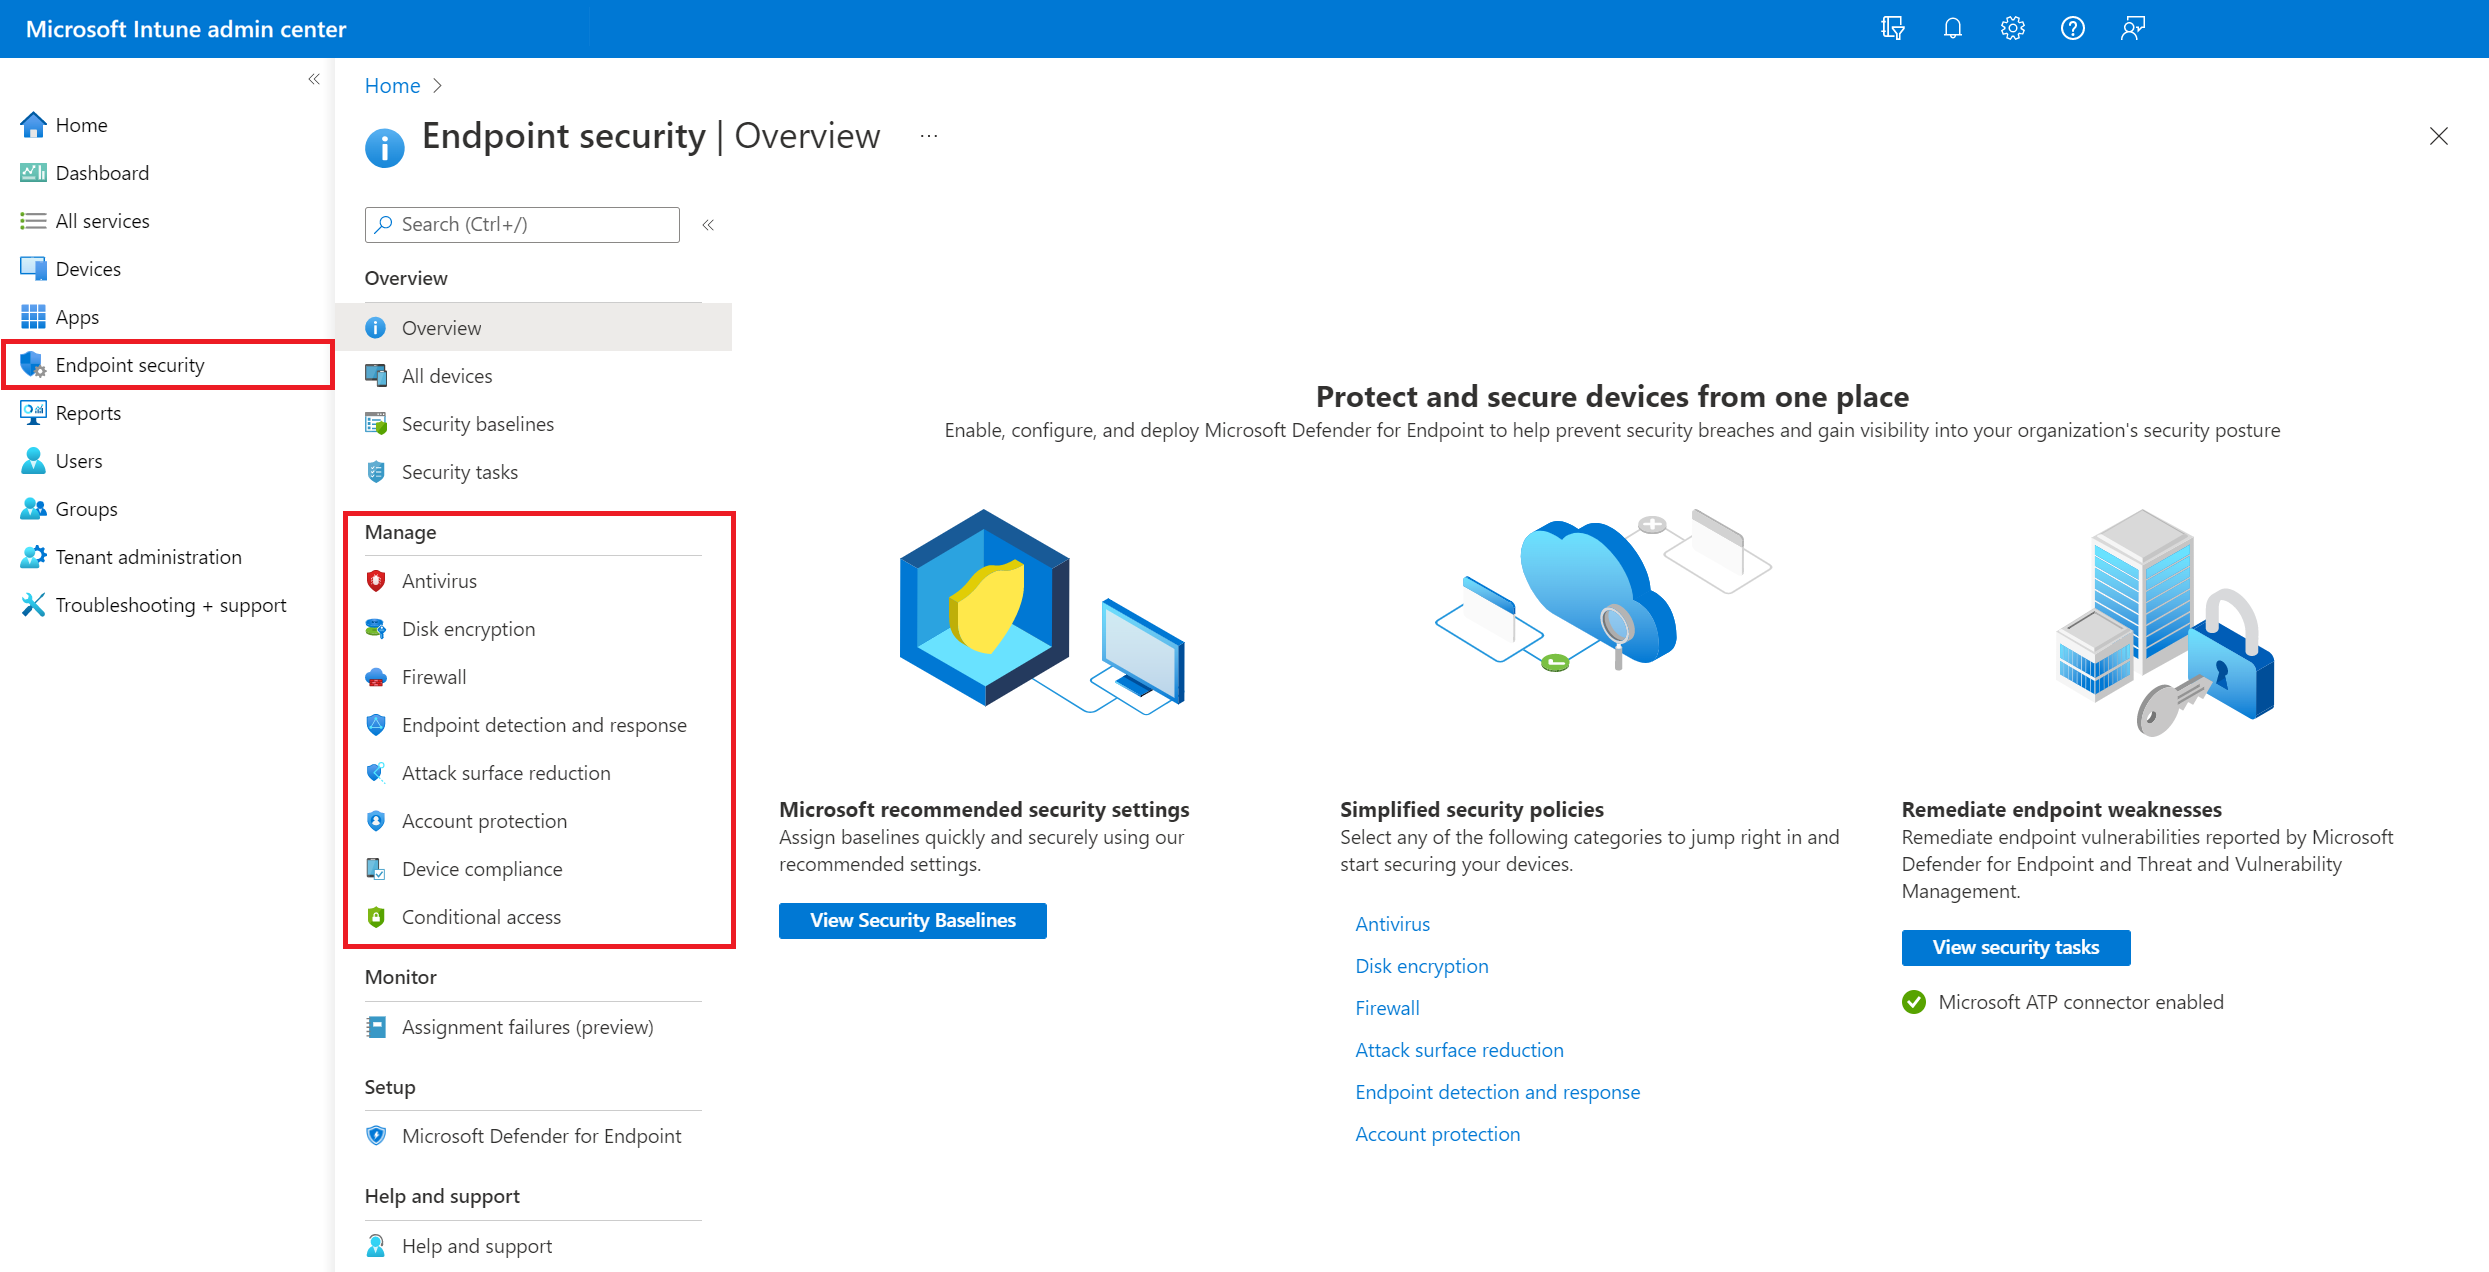 Managing Endpoint security policies in the Microsoft Endpoint Manager admin center